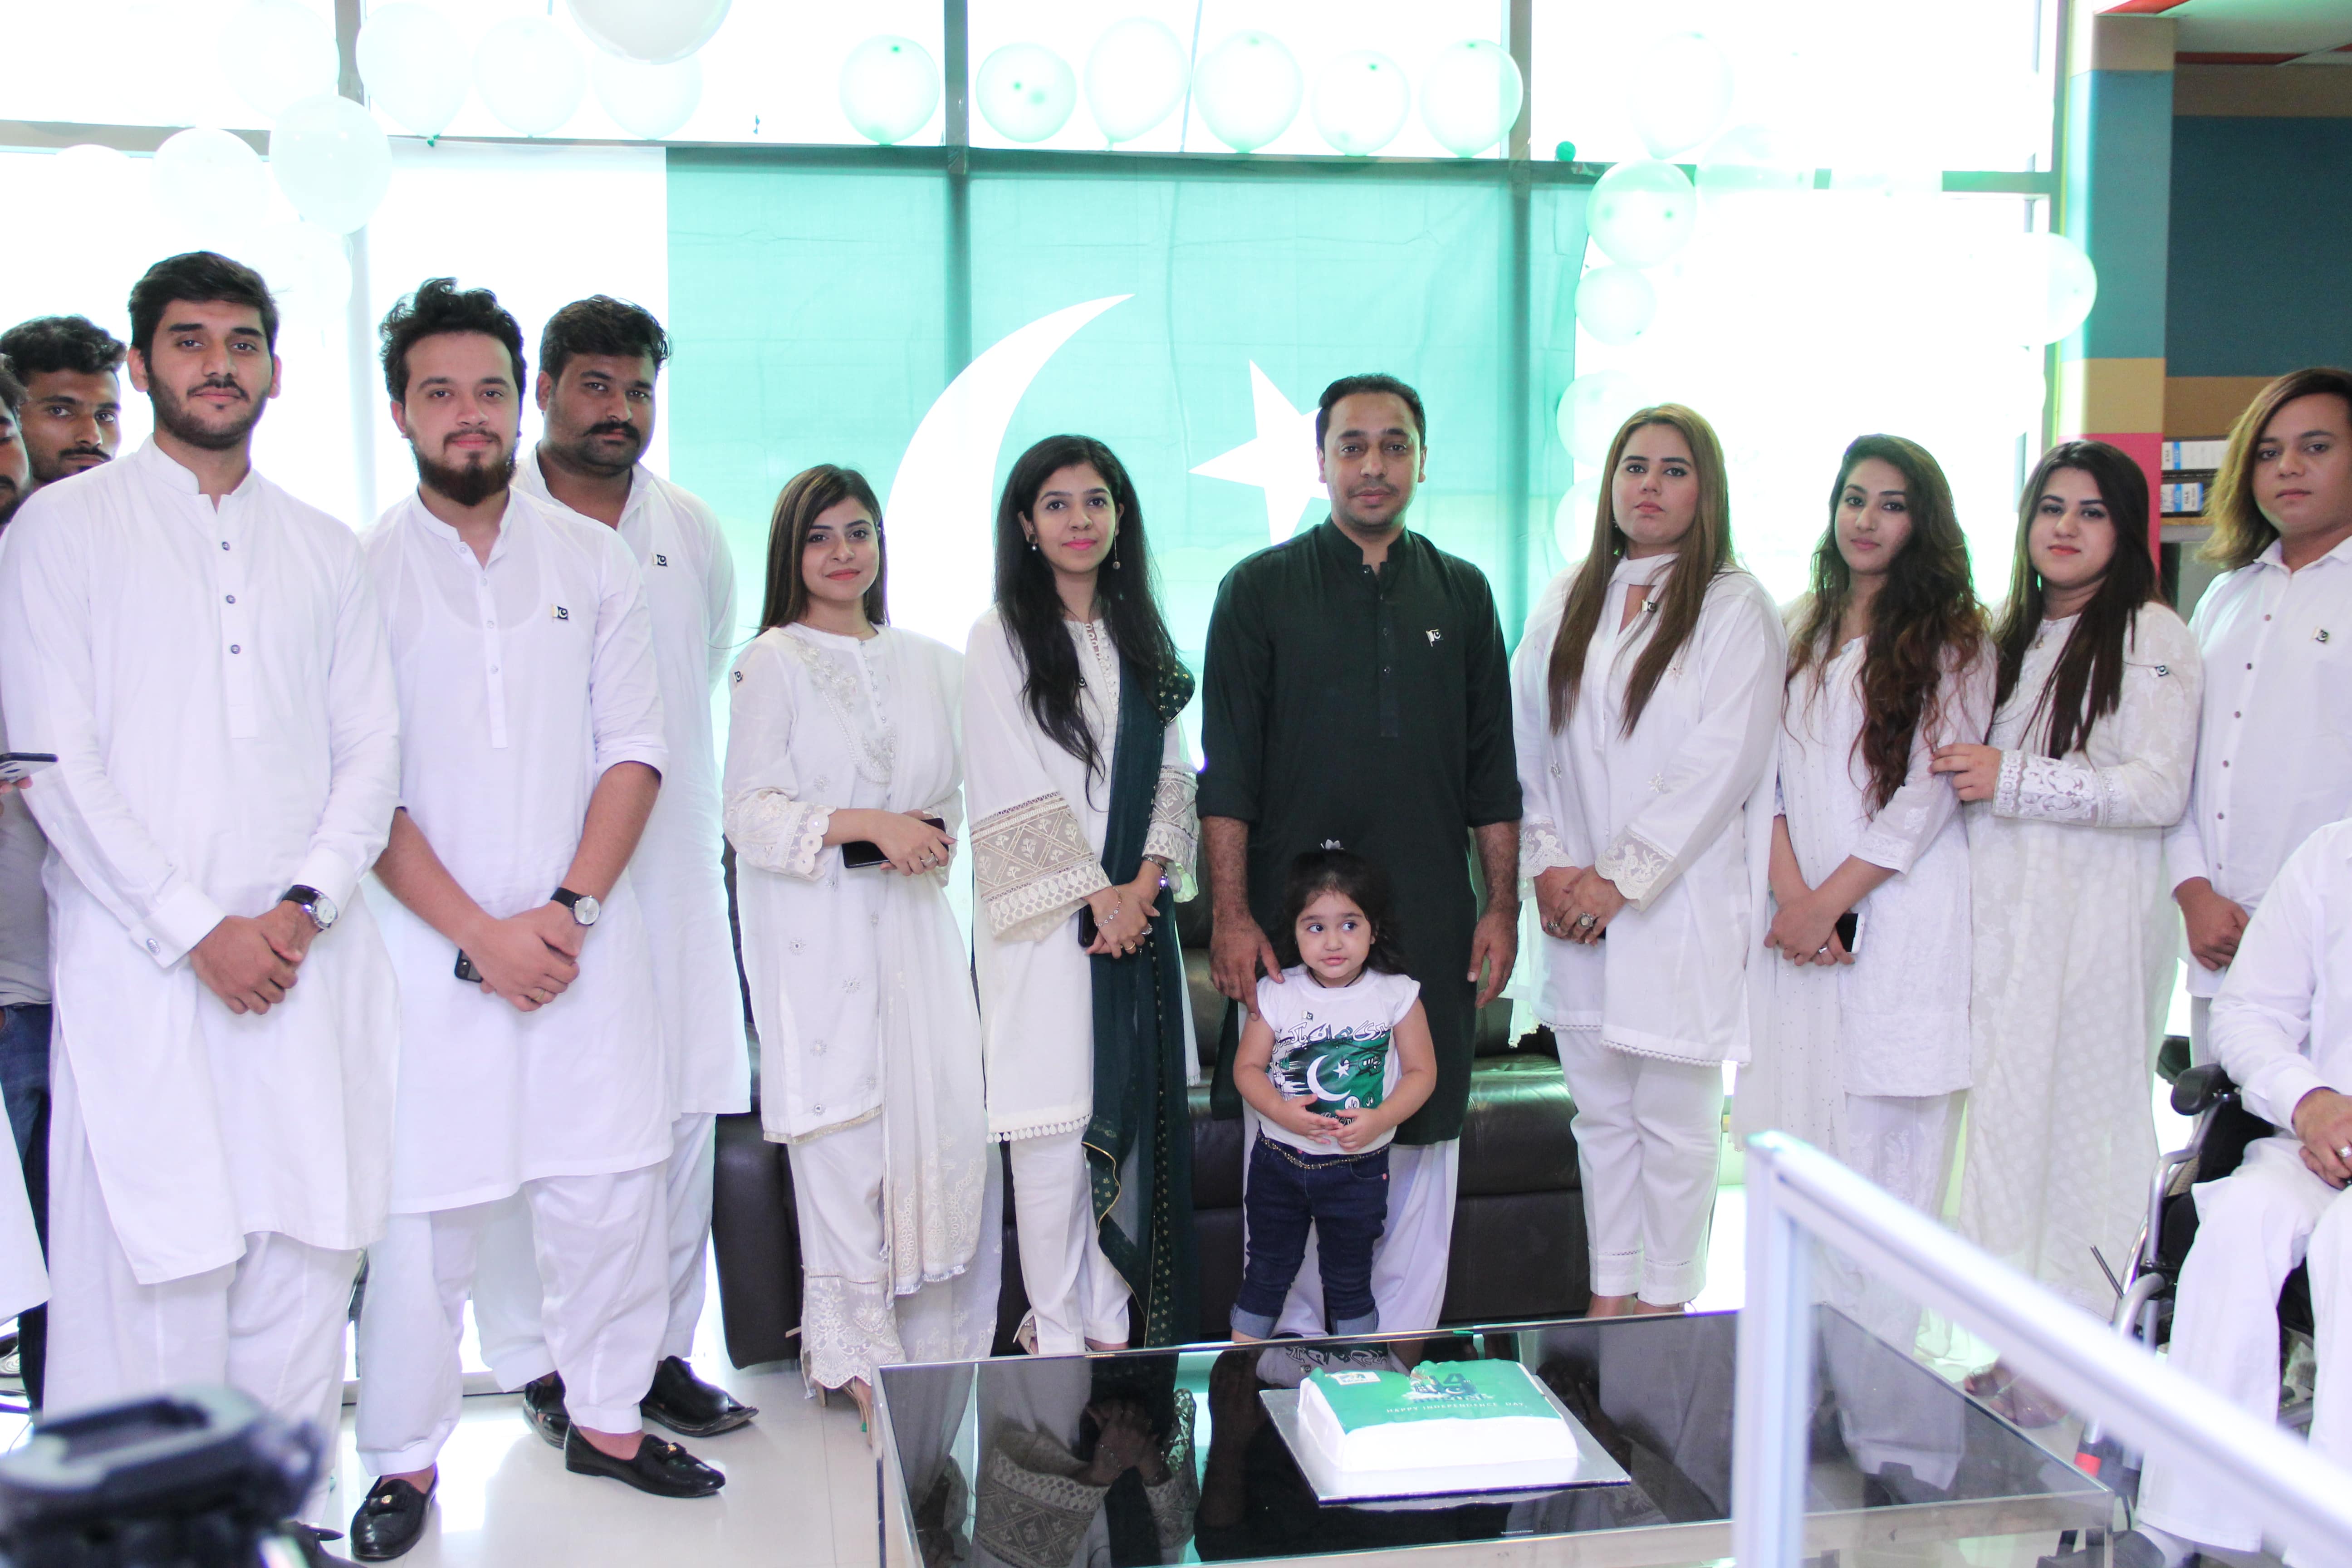 Independence Day 2020 | Head Office ilaan.com Lahore 